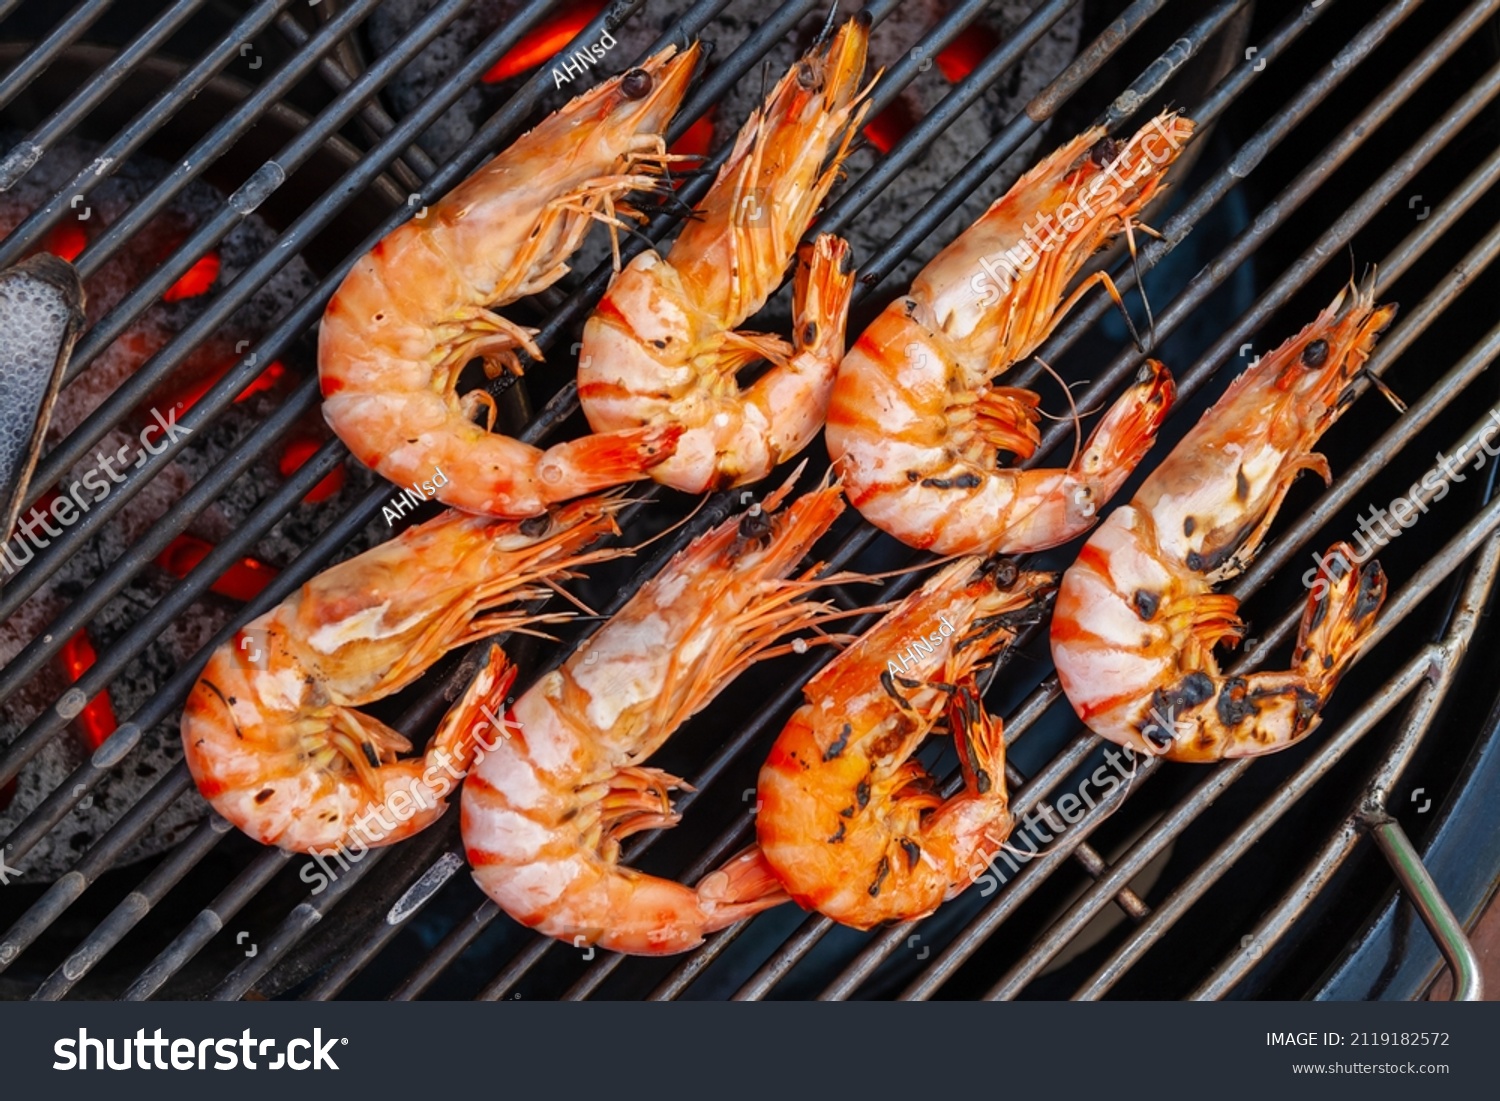 Grilled shrimp that's being cooked with smoke on the grill. #2119182572